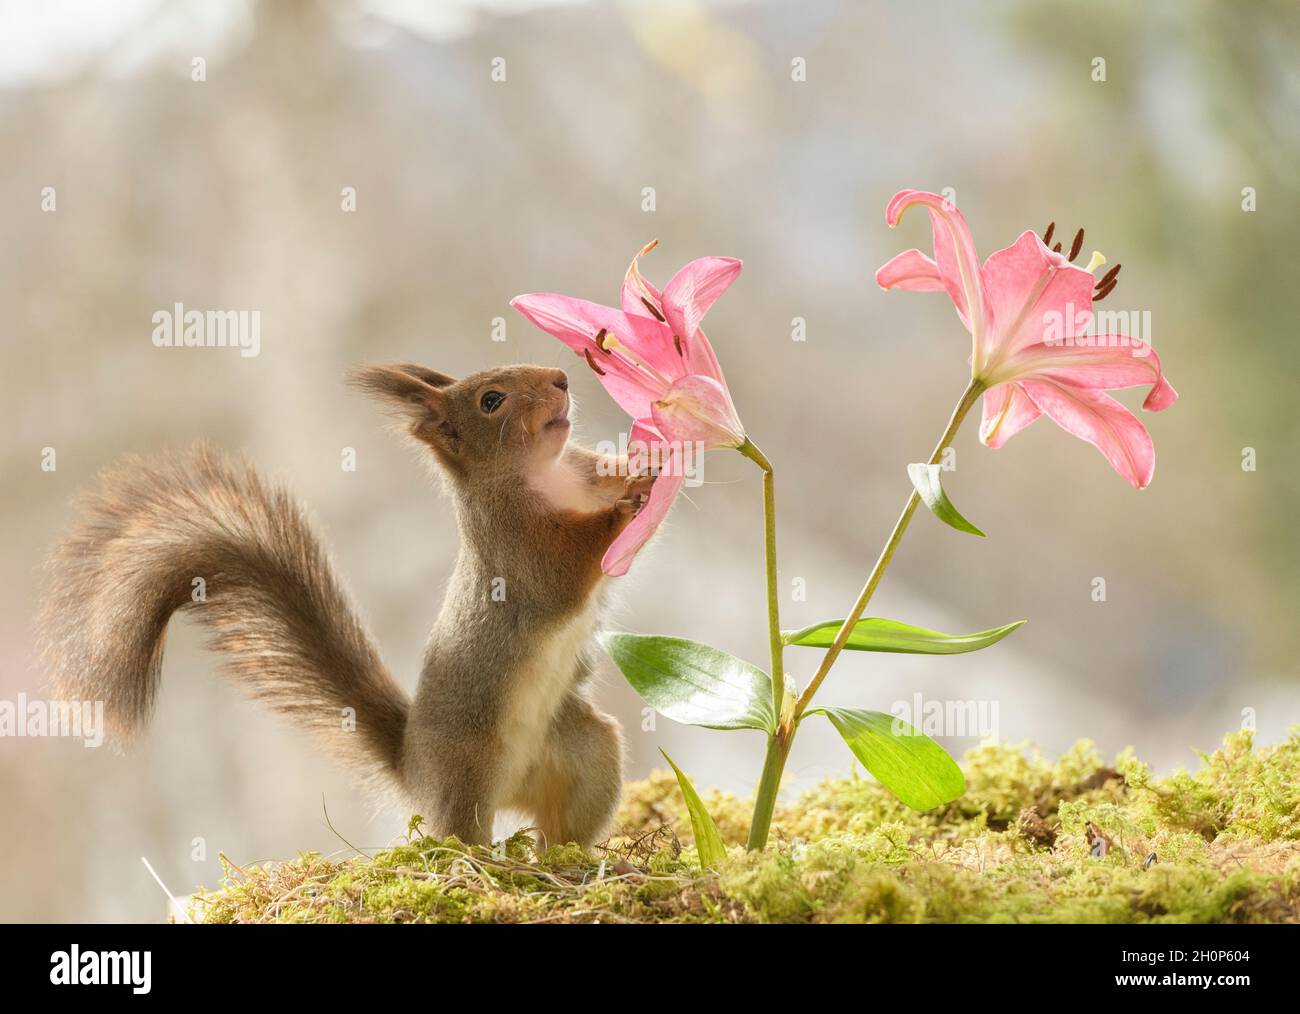 red squirrel is looking and holding a red Lilium Stock Photo